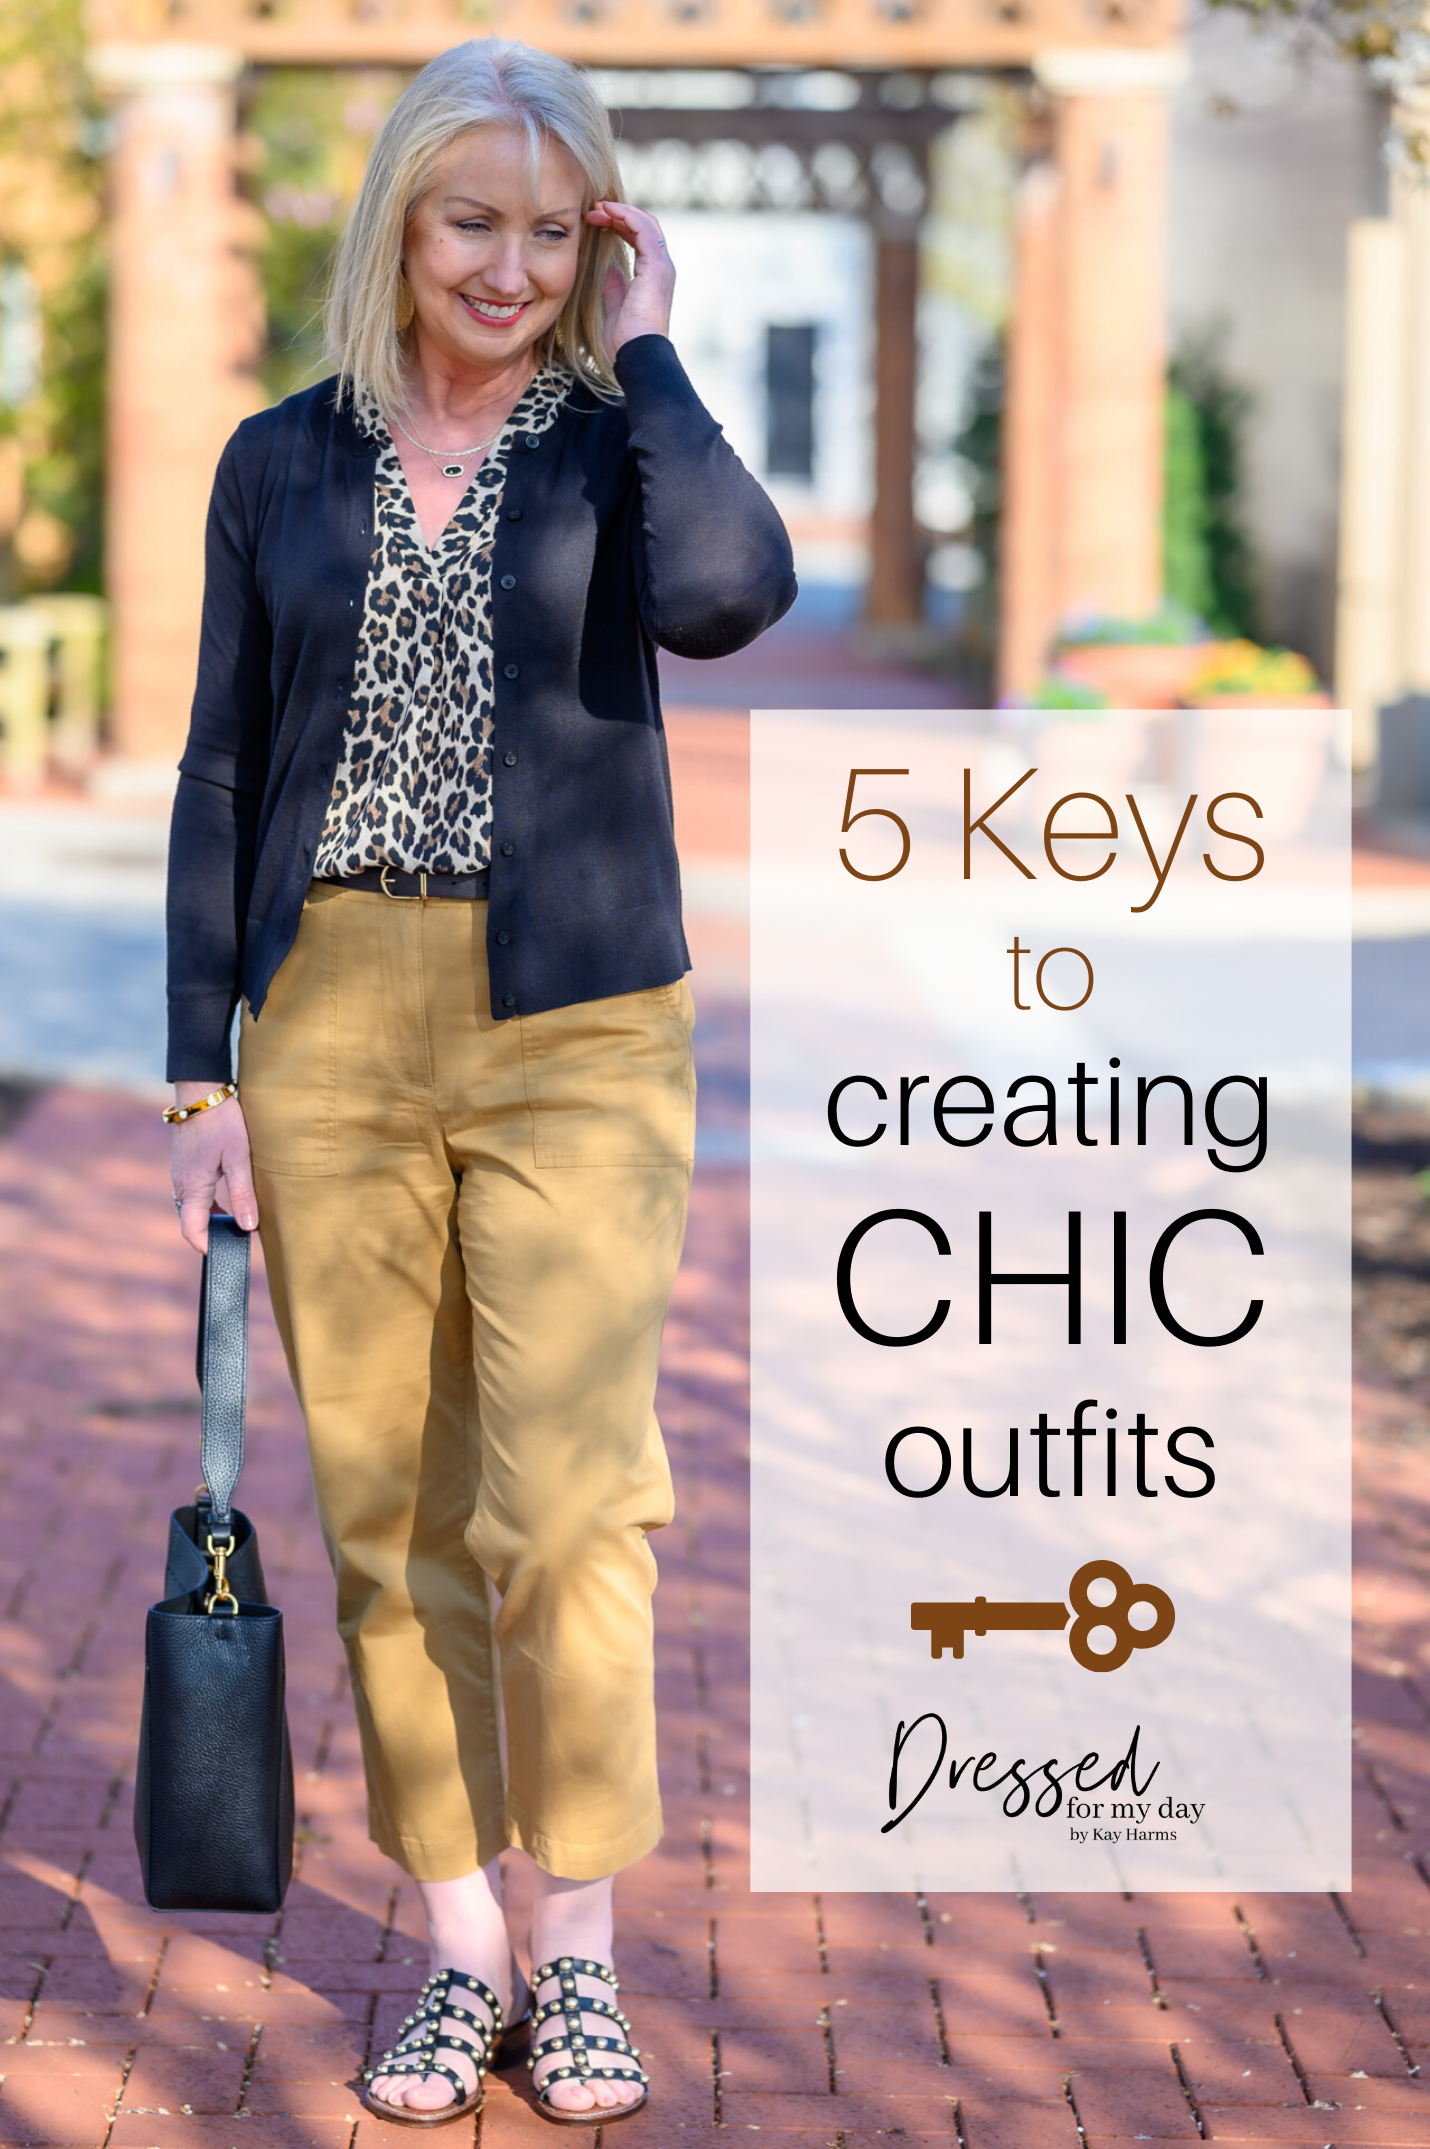 5 Keys to Creating Chic Outfits